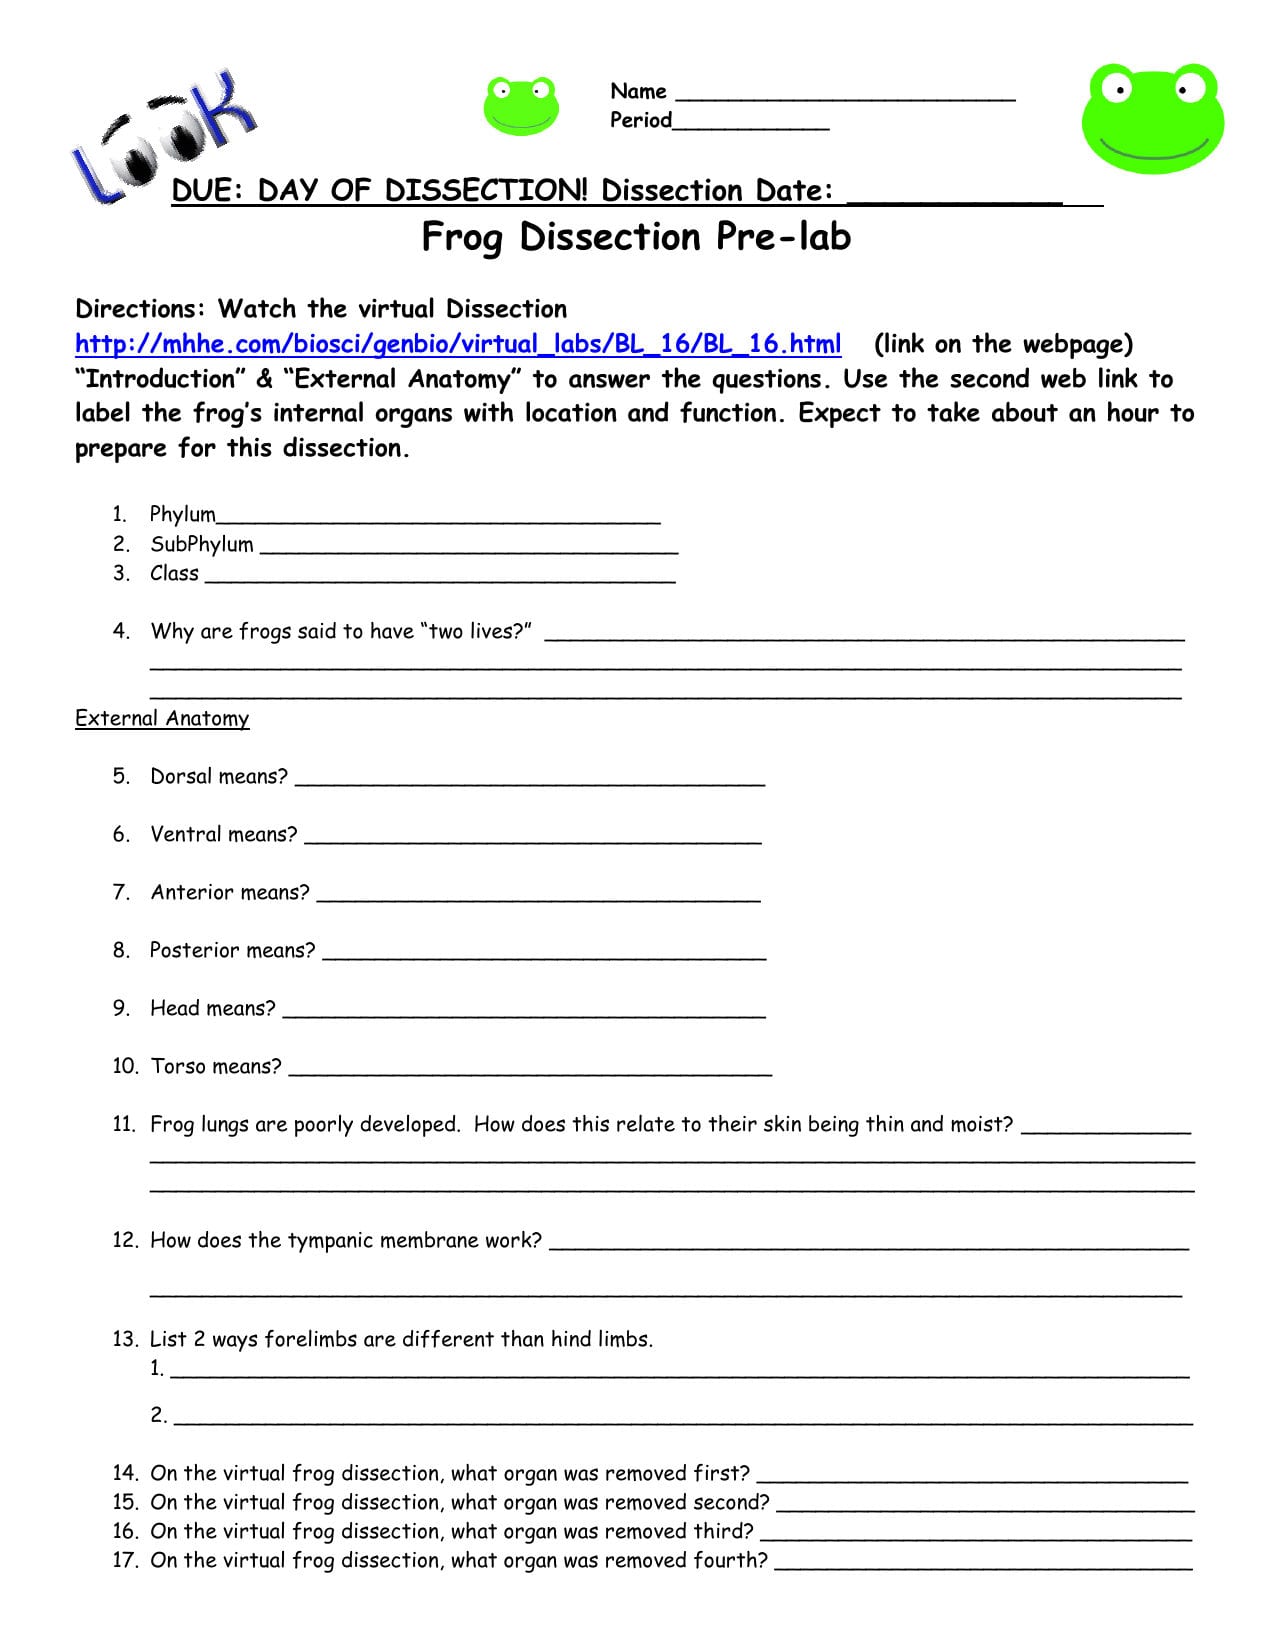 50-frog-dissection-worksheet-answer-key-chessmuseum-template-library